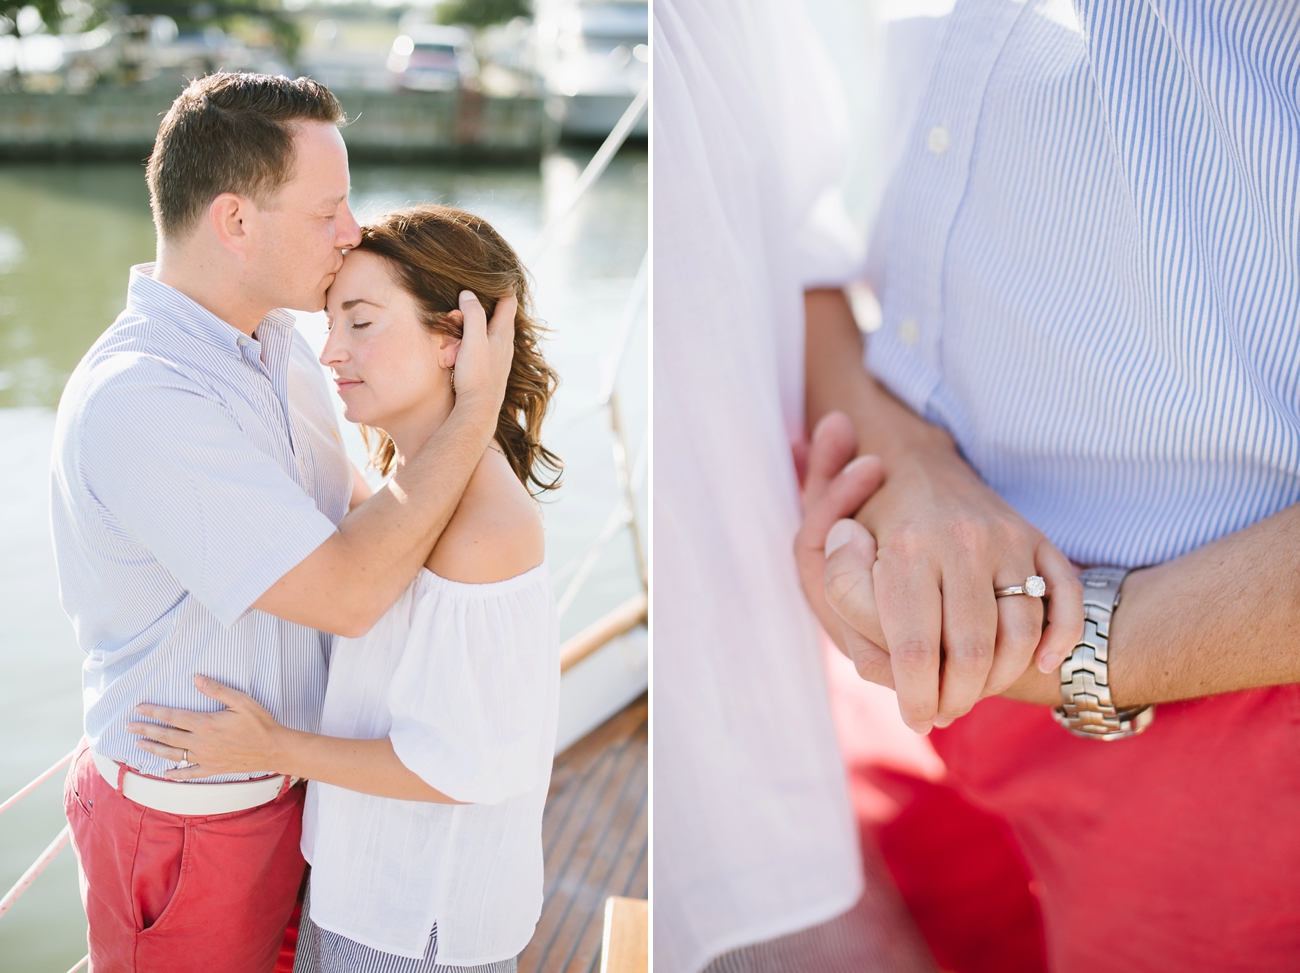 Tighlman Island Engagement Pictures | Natalie Franke Photography